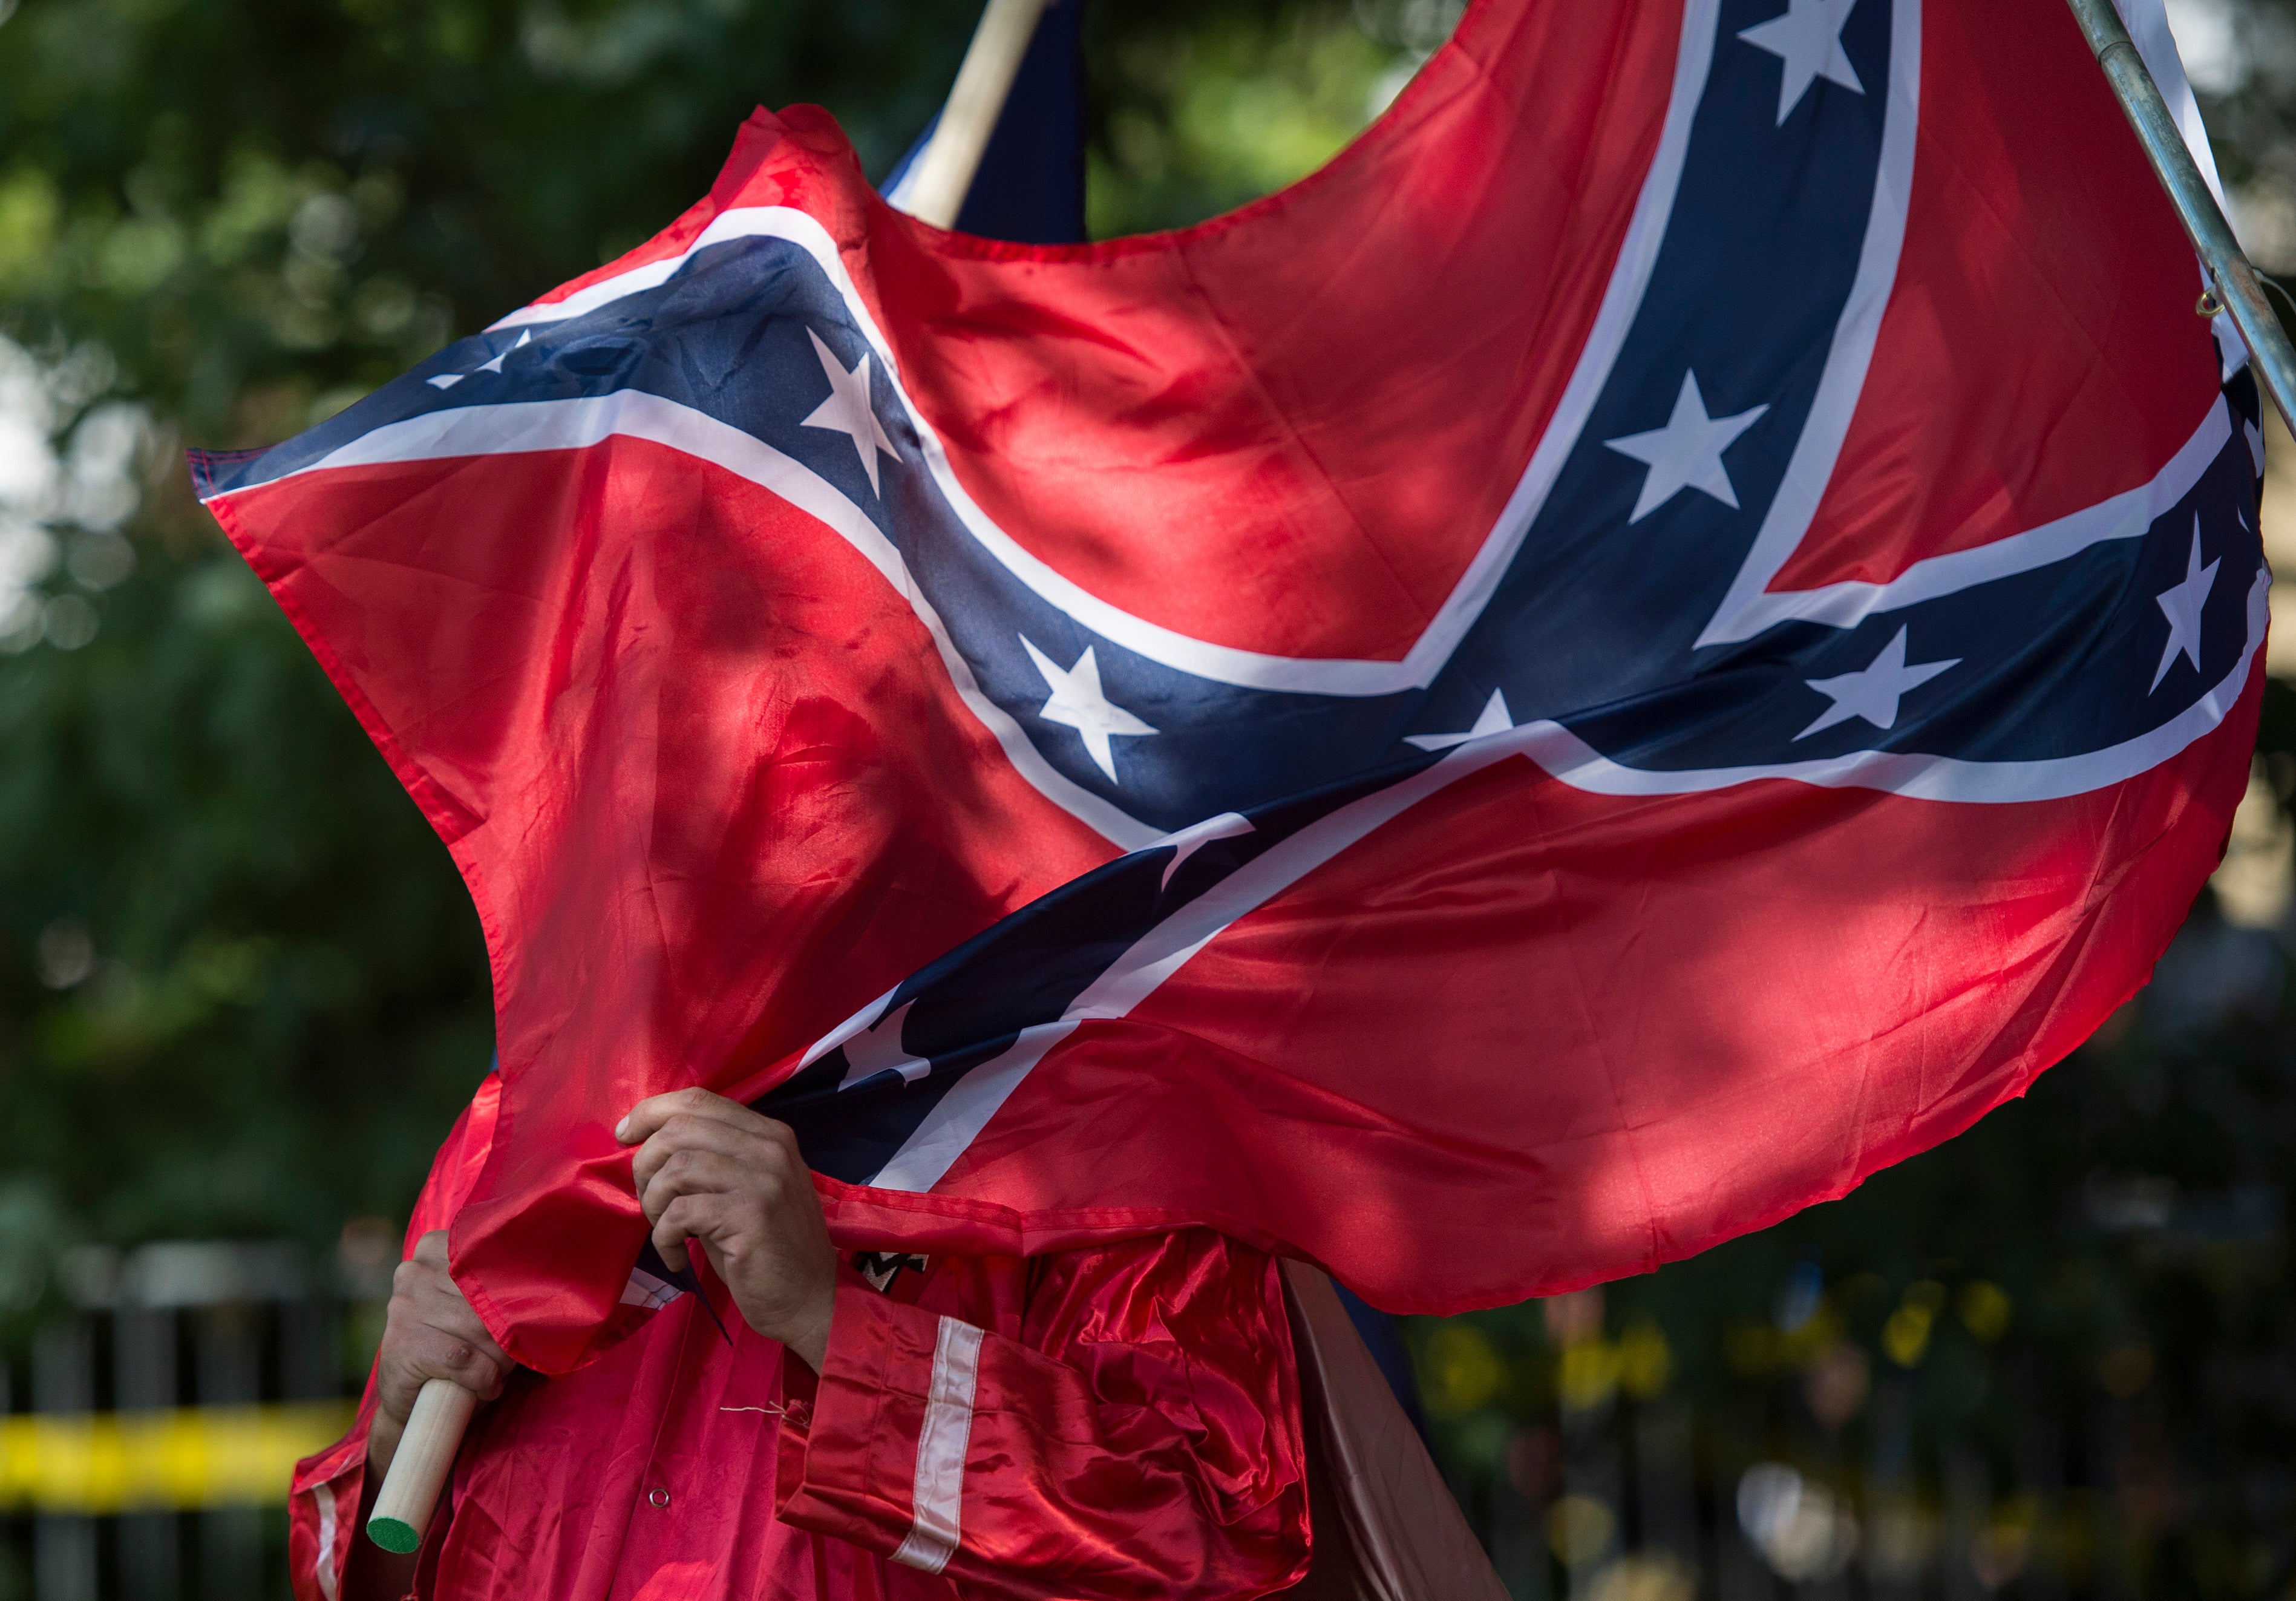 Charleston, South Carolina Formally Apologizes For Its Role in Slavery